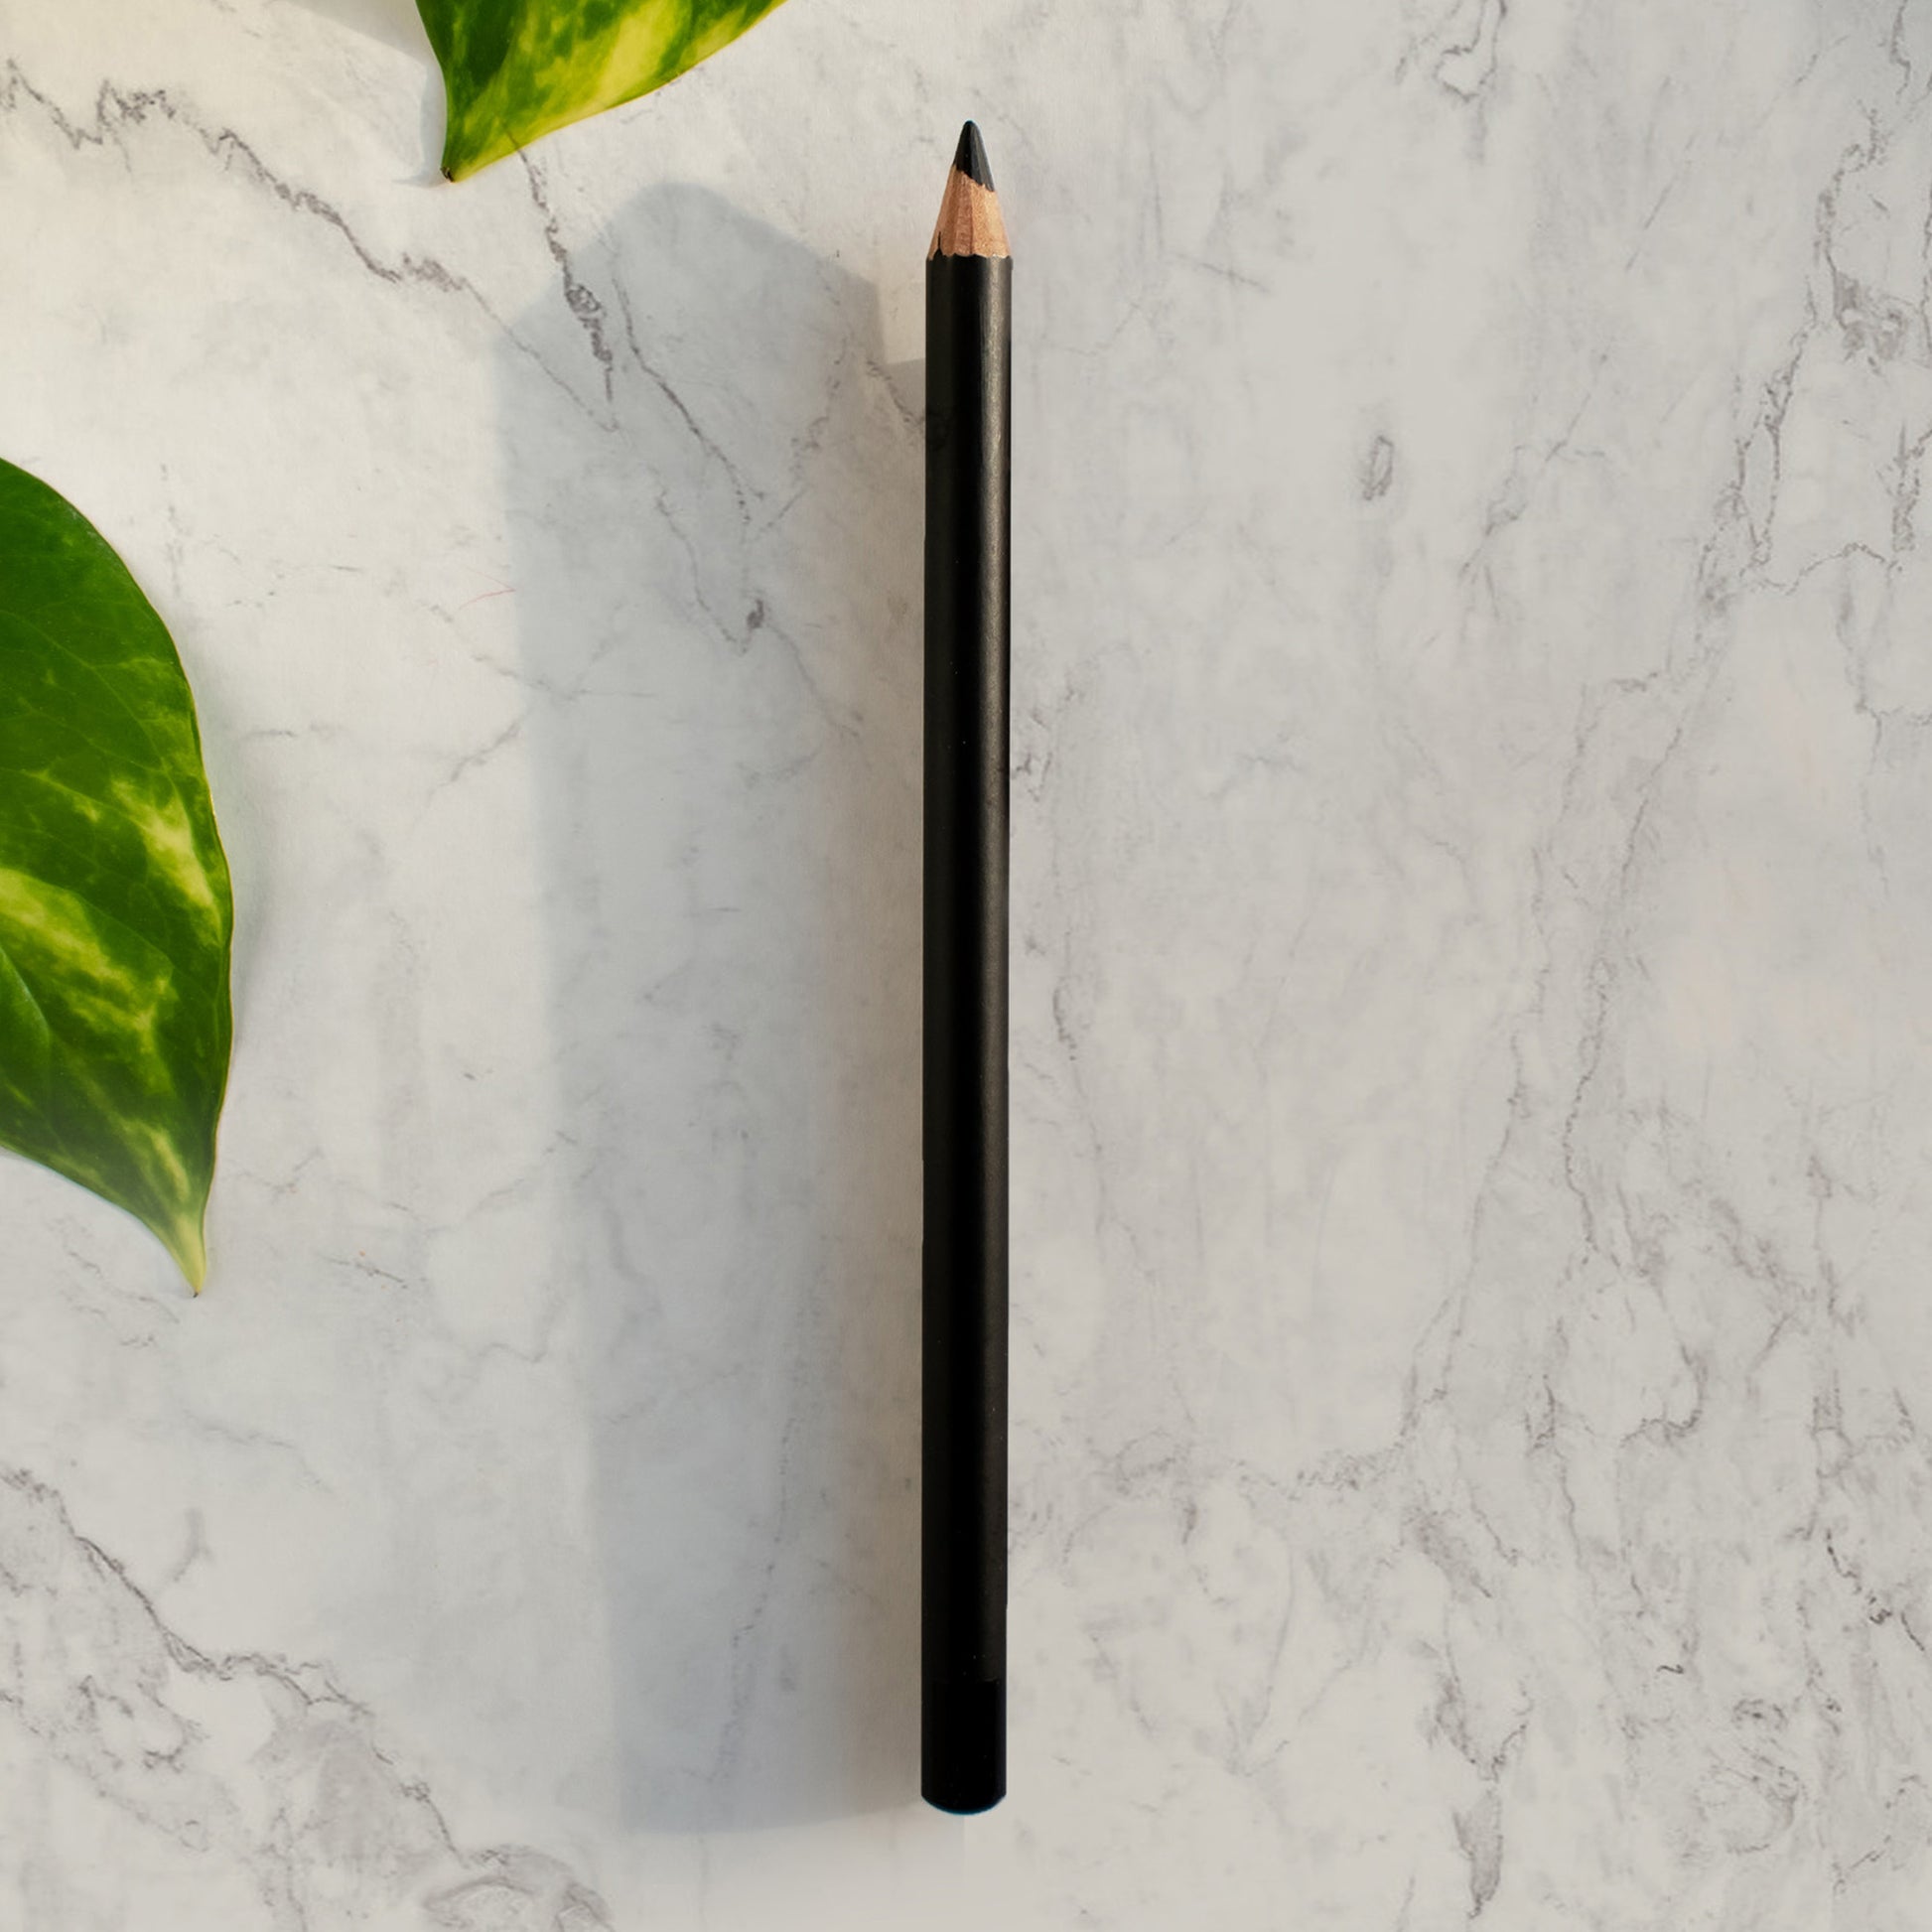 Creamy smoothness of Cruisin Organics Brown Eye Pencil, creating a glamorous smudged look that will captivate any gaze and dispel any doubts. Elevate your eye game with this luxurious and must-have beauty product.